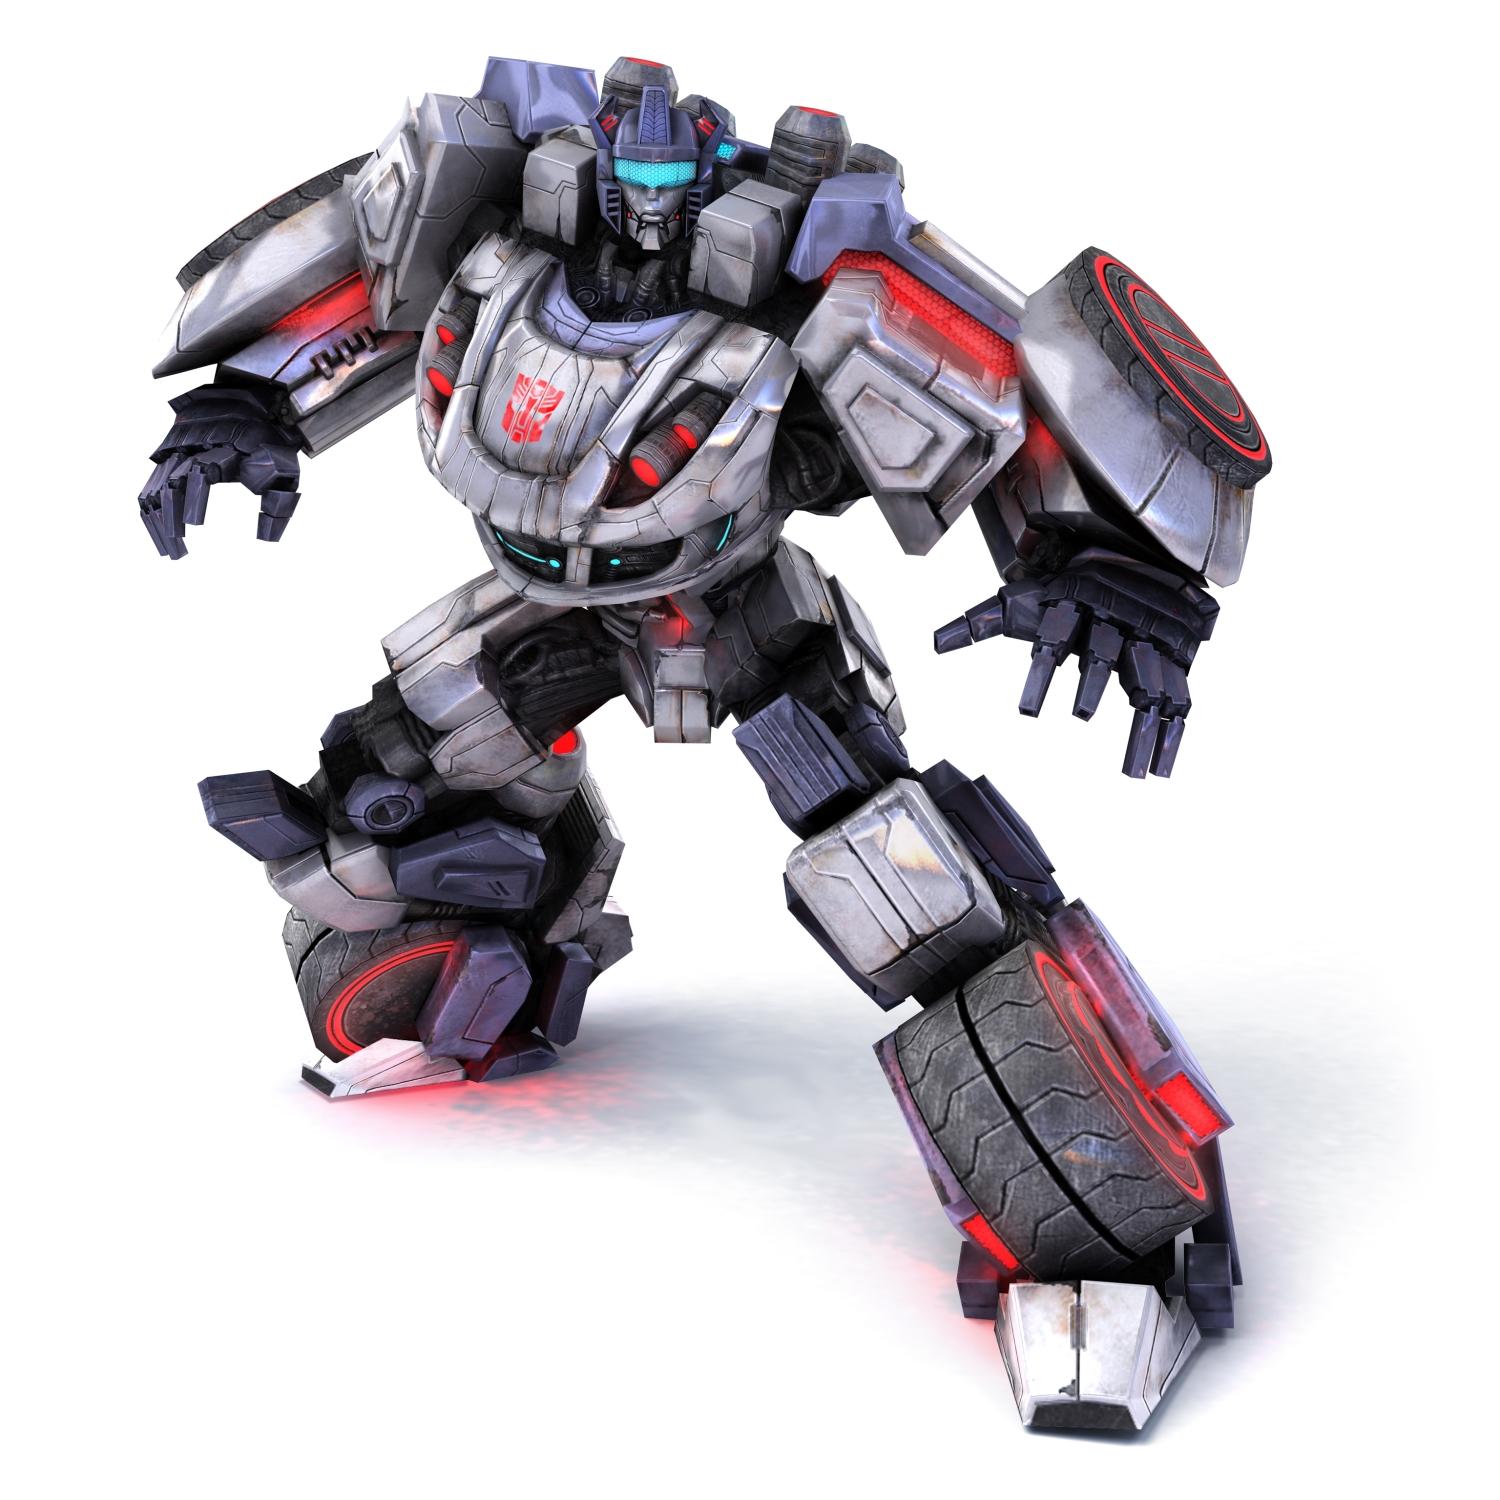 Transformers War For Cybertron Jazz as a Best-Buy Exclusive character